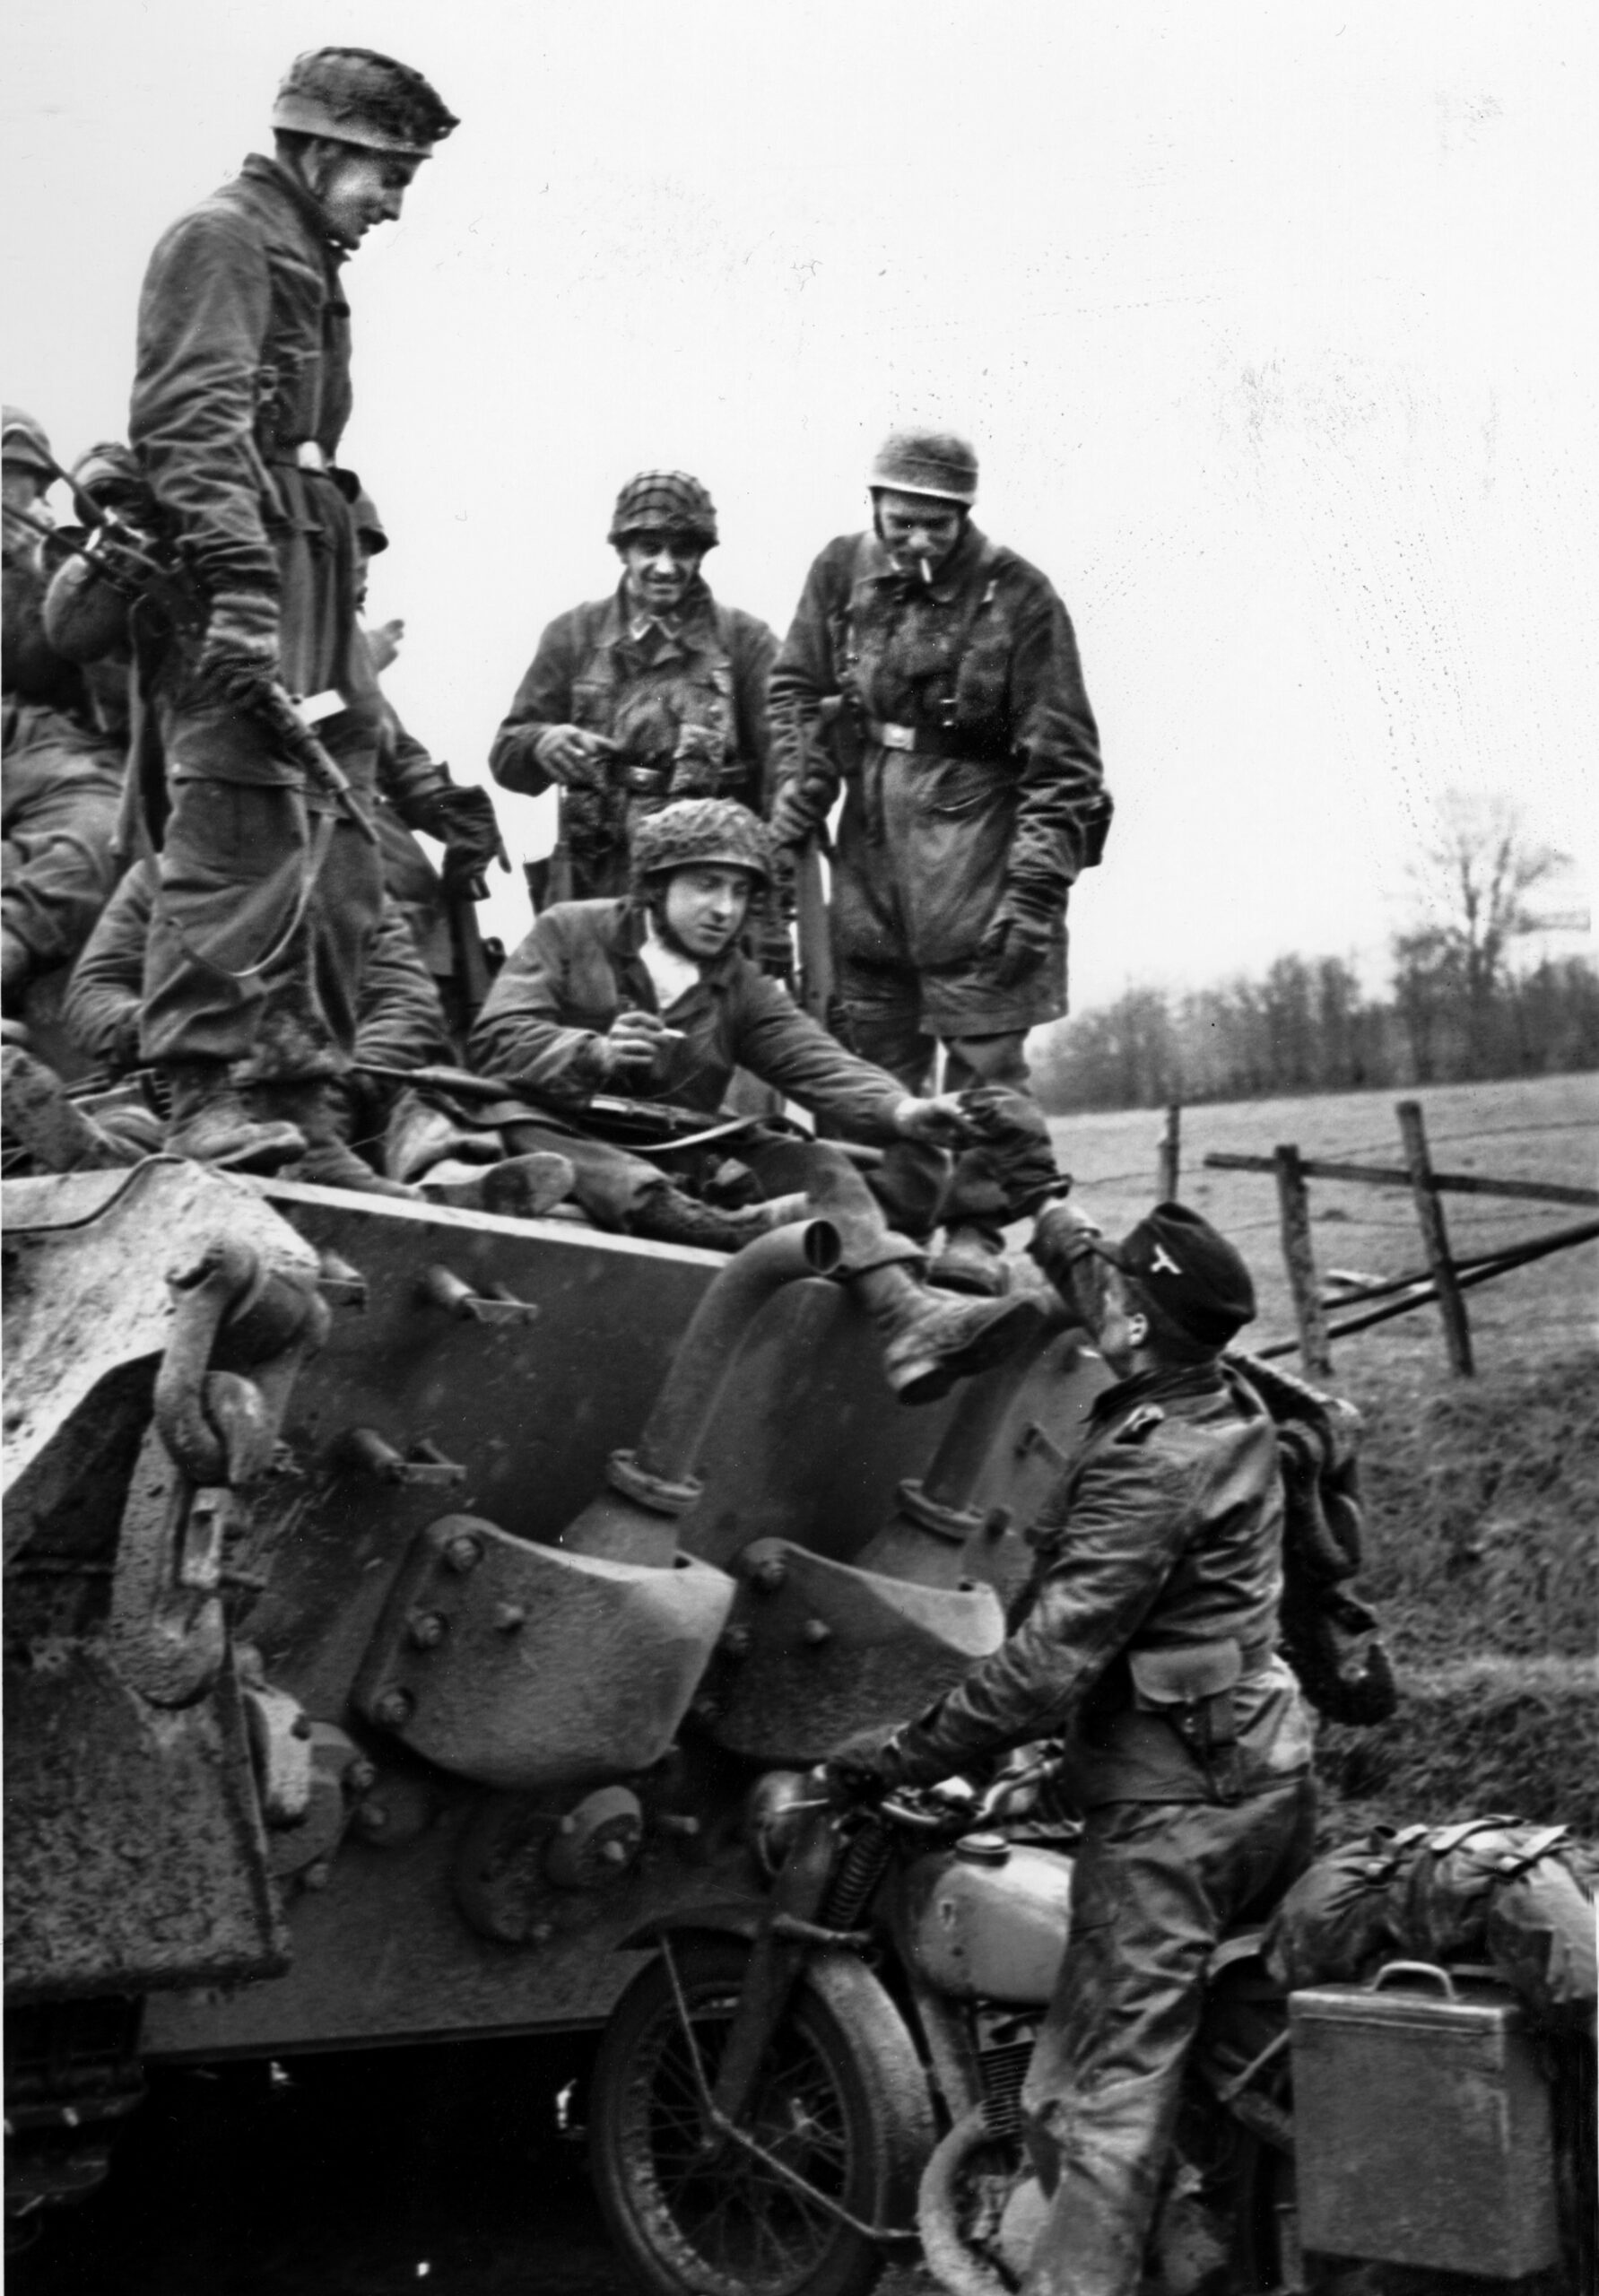 Armed with a variety of German and captured weapons, a group of Fallschirmjäger roll through Liegneuville, Belgium to rejoin the main body of Kampfgruppe Peiper.